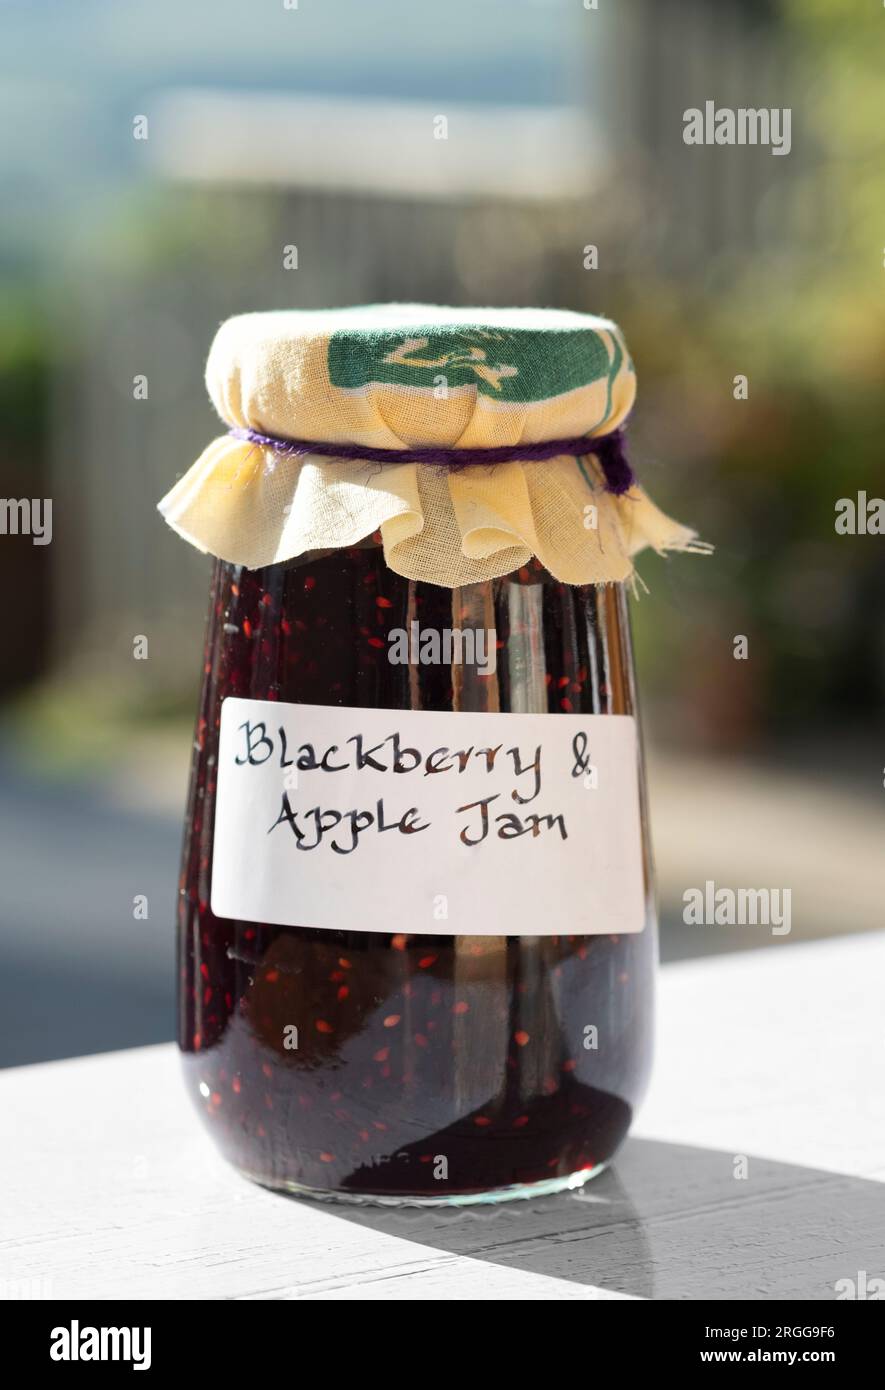 Jars of homemade Blackberry and apple jam. the jars have clear handwritten lables and the jars have a cloth topping Stock Photo